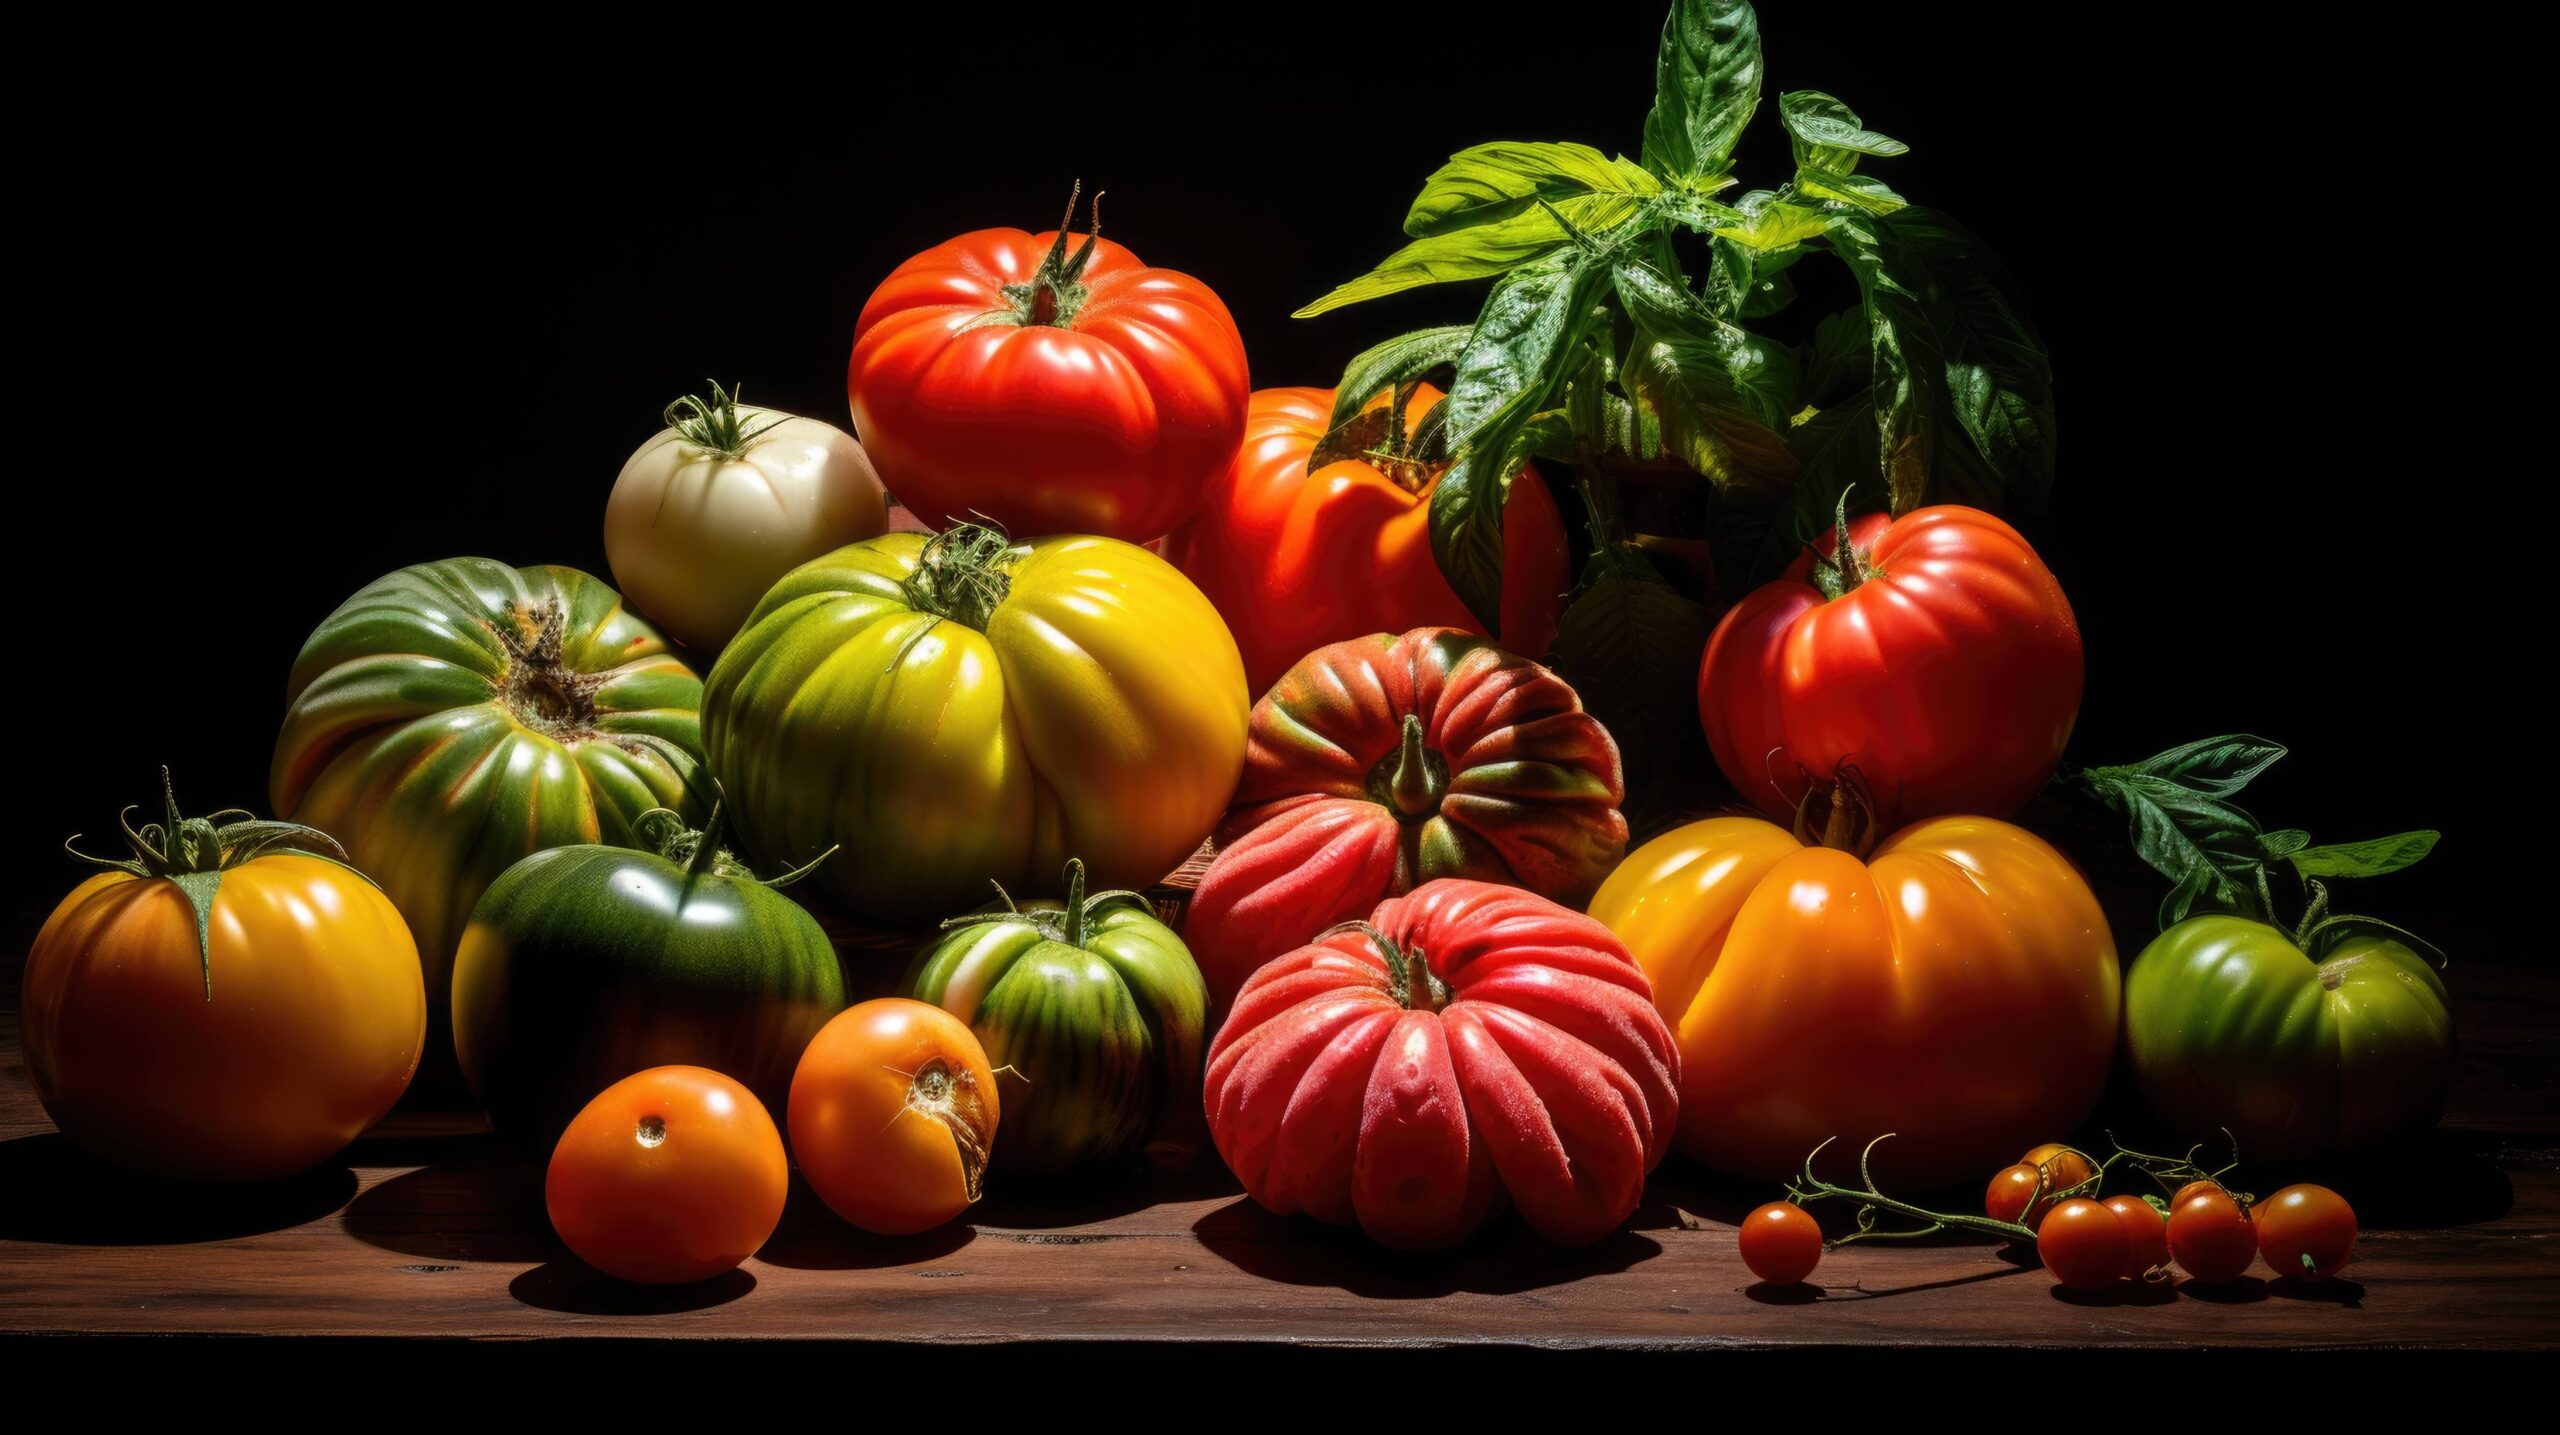 A Beginner’s Guide to Growing Organic Tomatoes